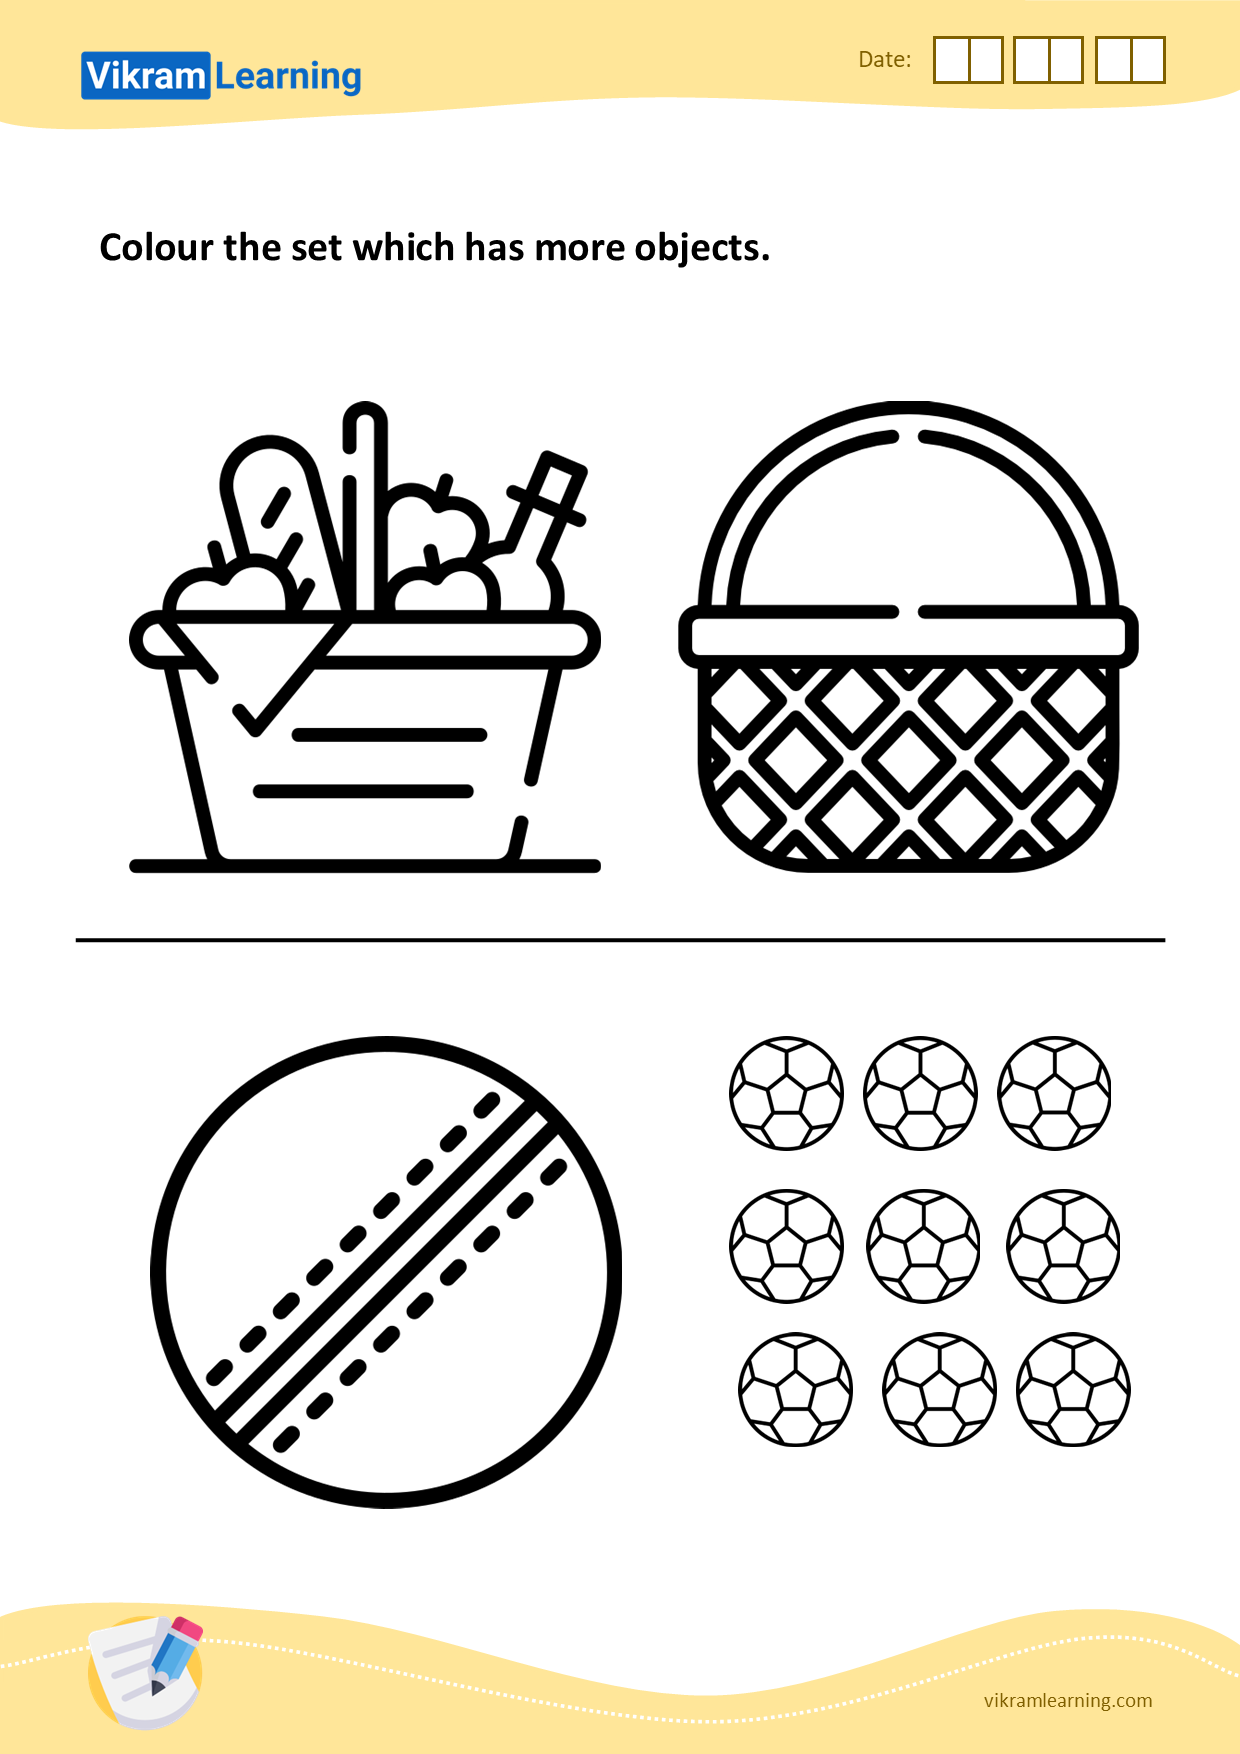 Download colour the set which has more objects worksheets